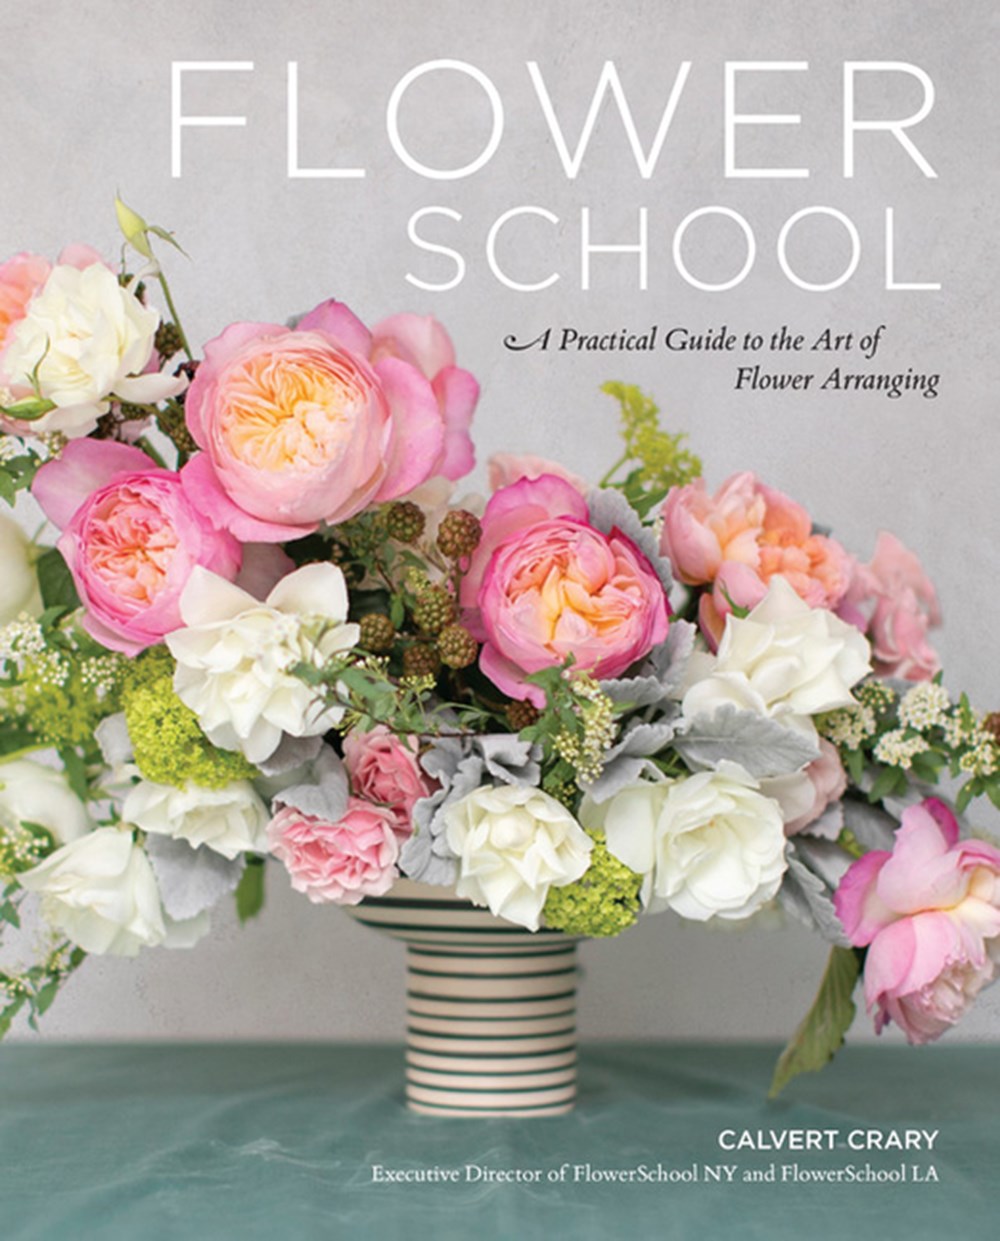 Flower School A Practical Guide to the Art of Flower Arranging